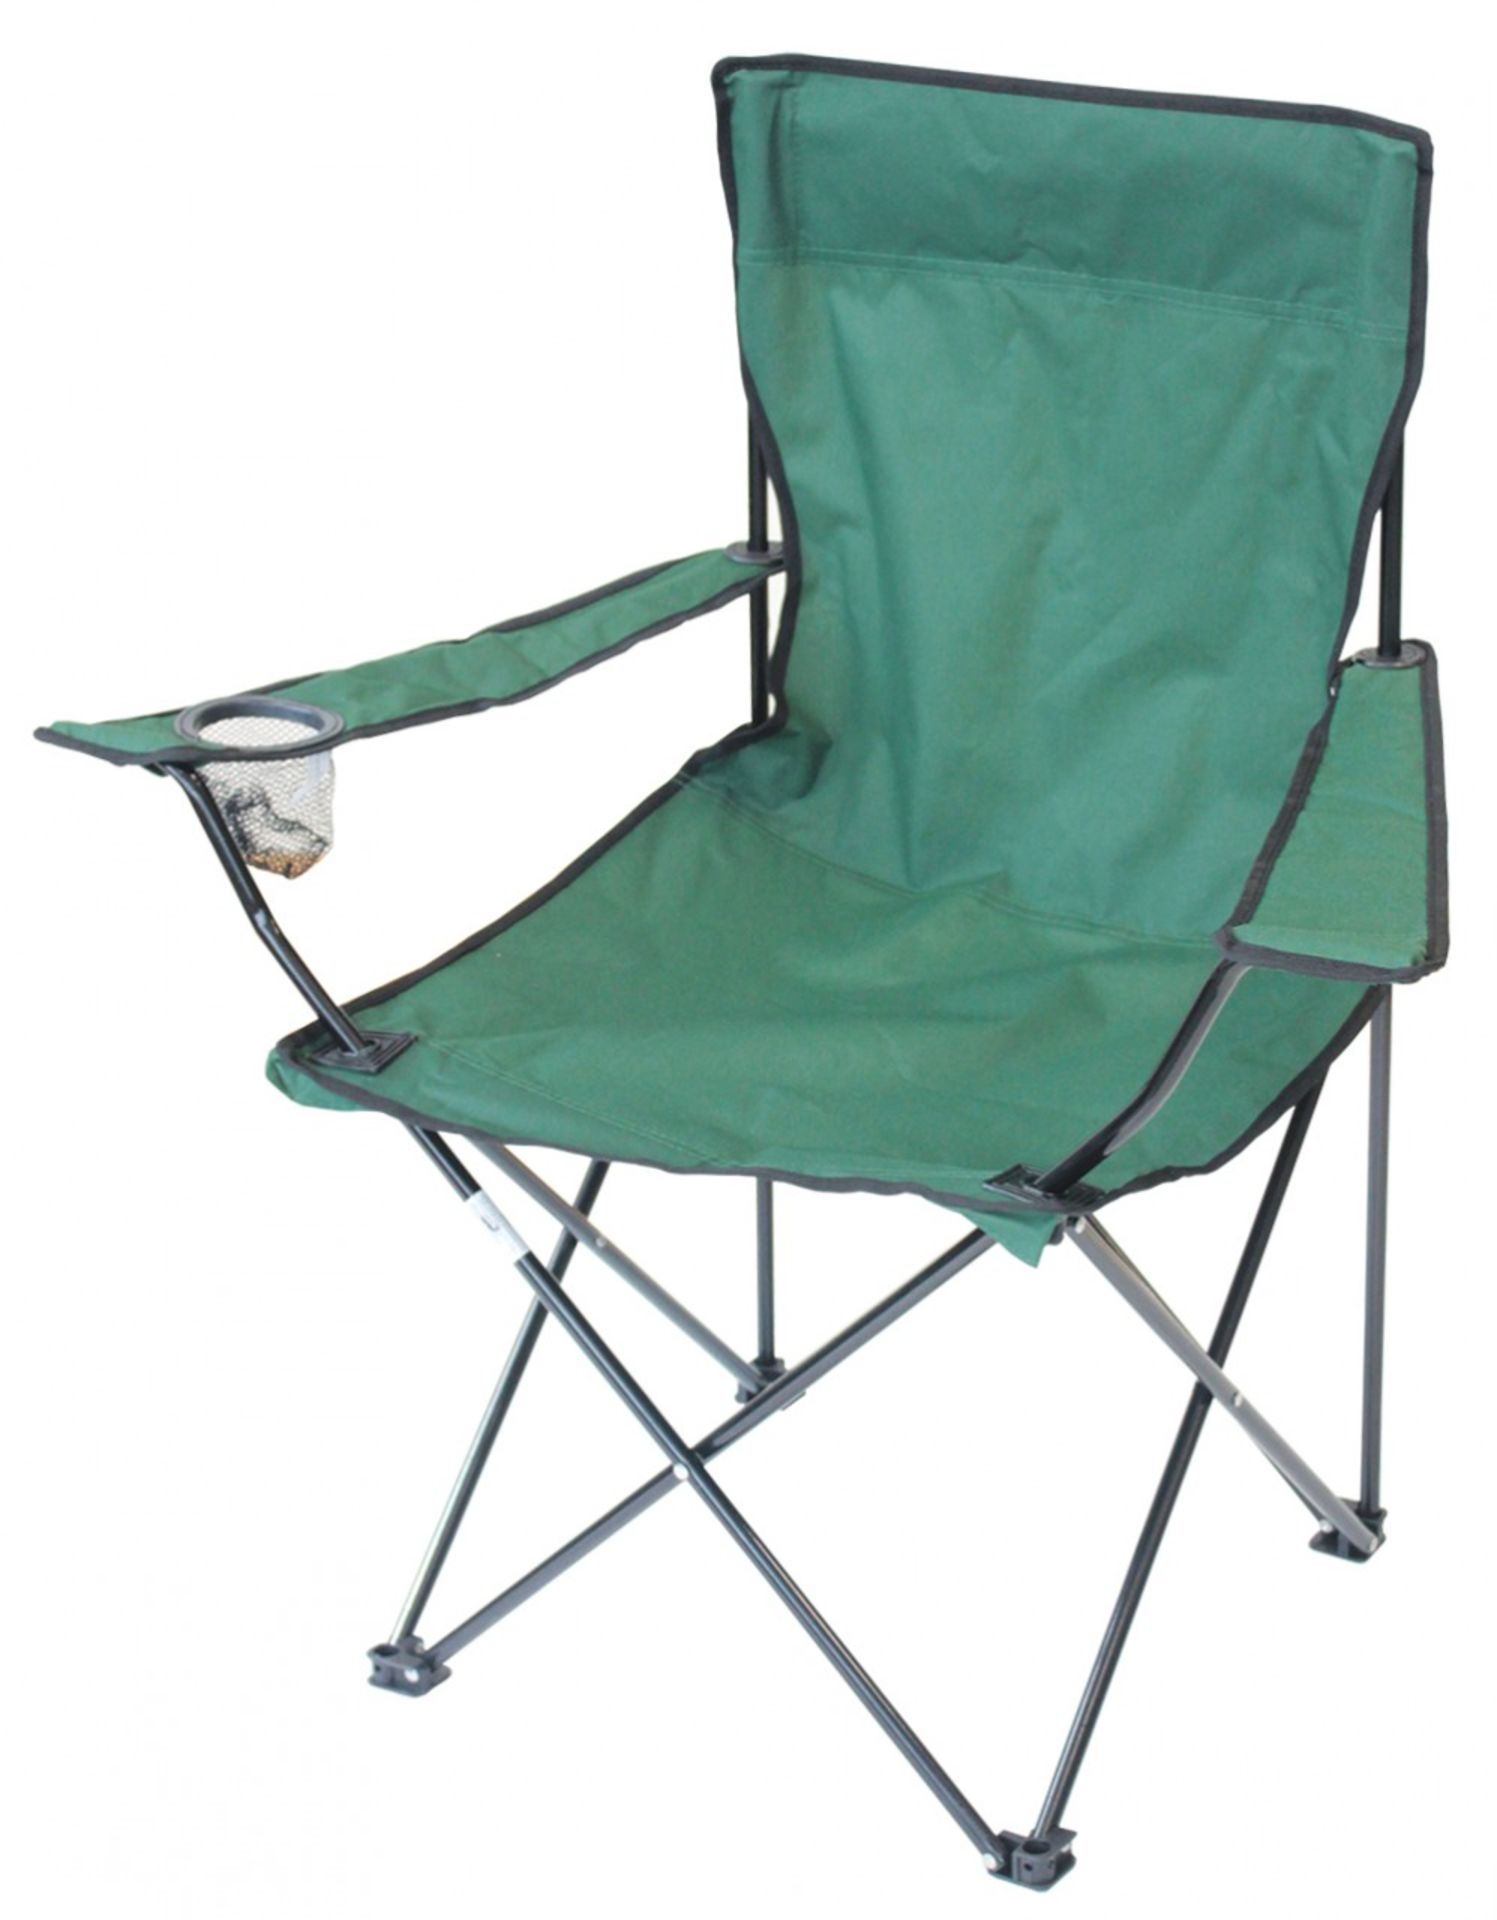 V *TRADE QTY* Brand New Folding Outdoor Chair with Cup Holder RRP £15 (similar Millets) X 10 YOUR